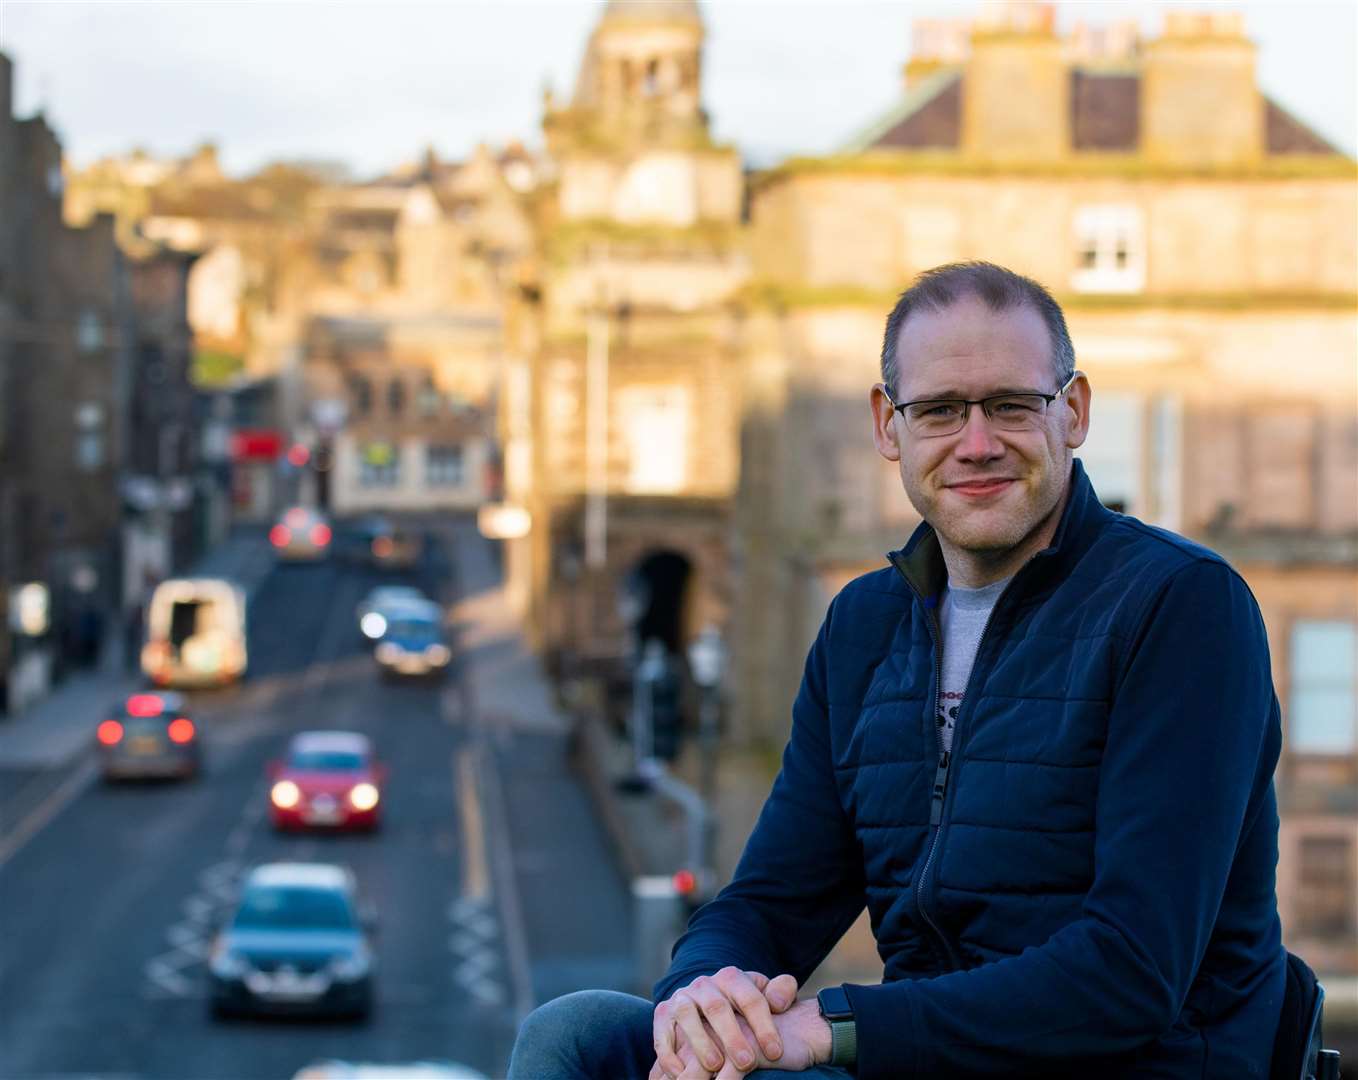 Caithness Councillor Andrew Jarvie was parked on Church Street in Inverness when he received a parking ticket.